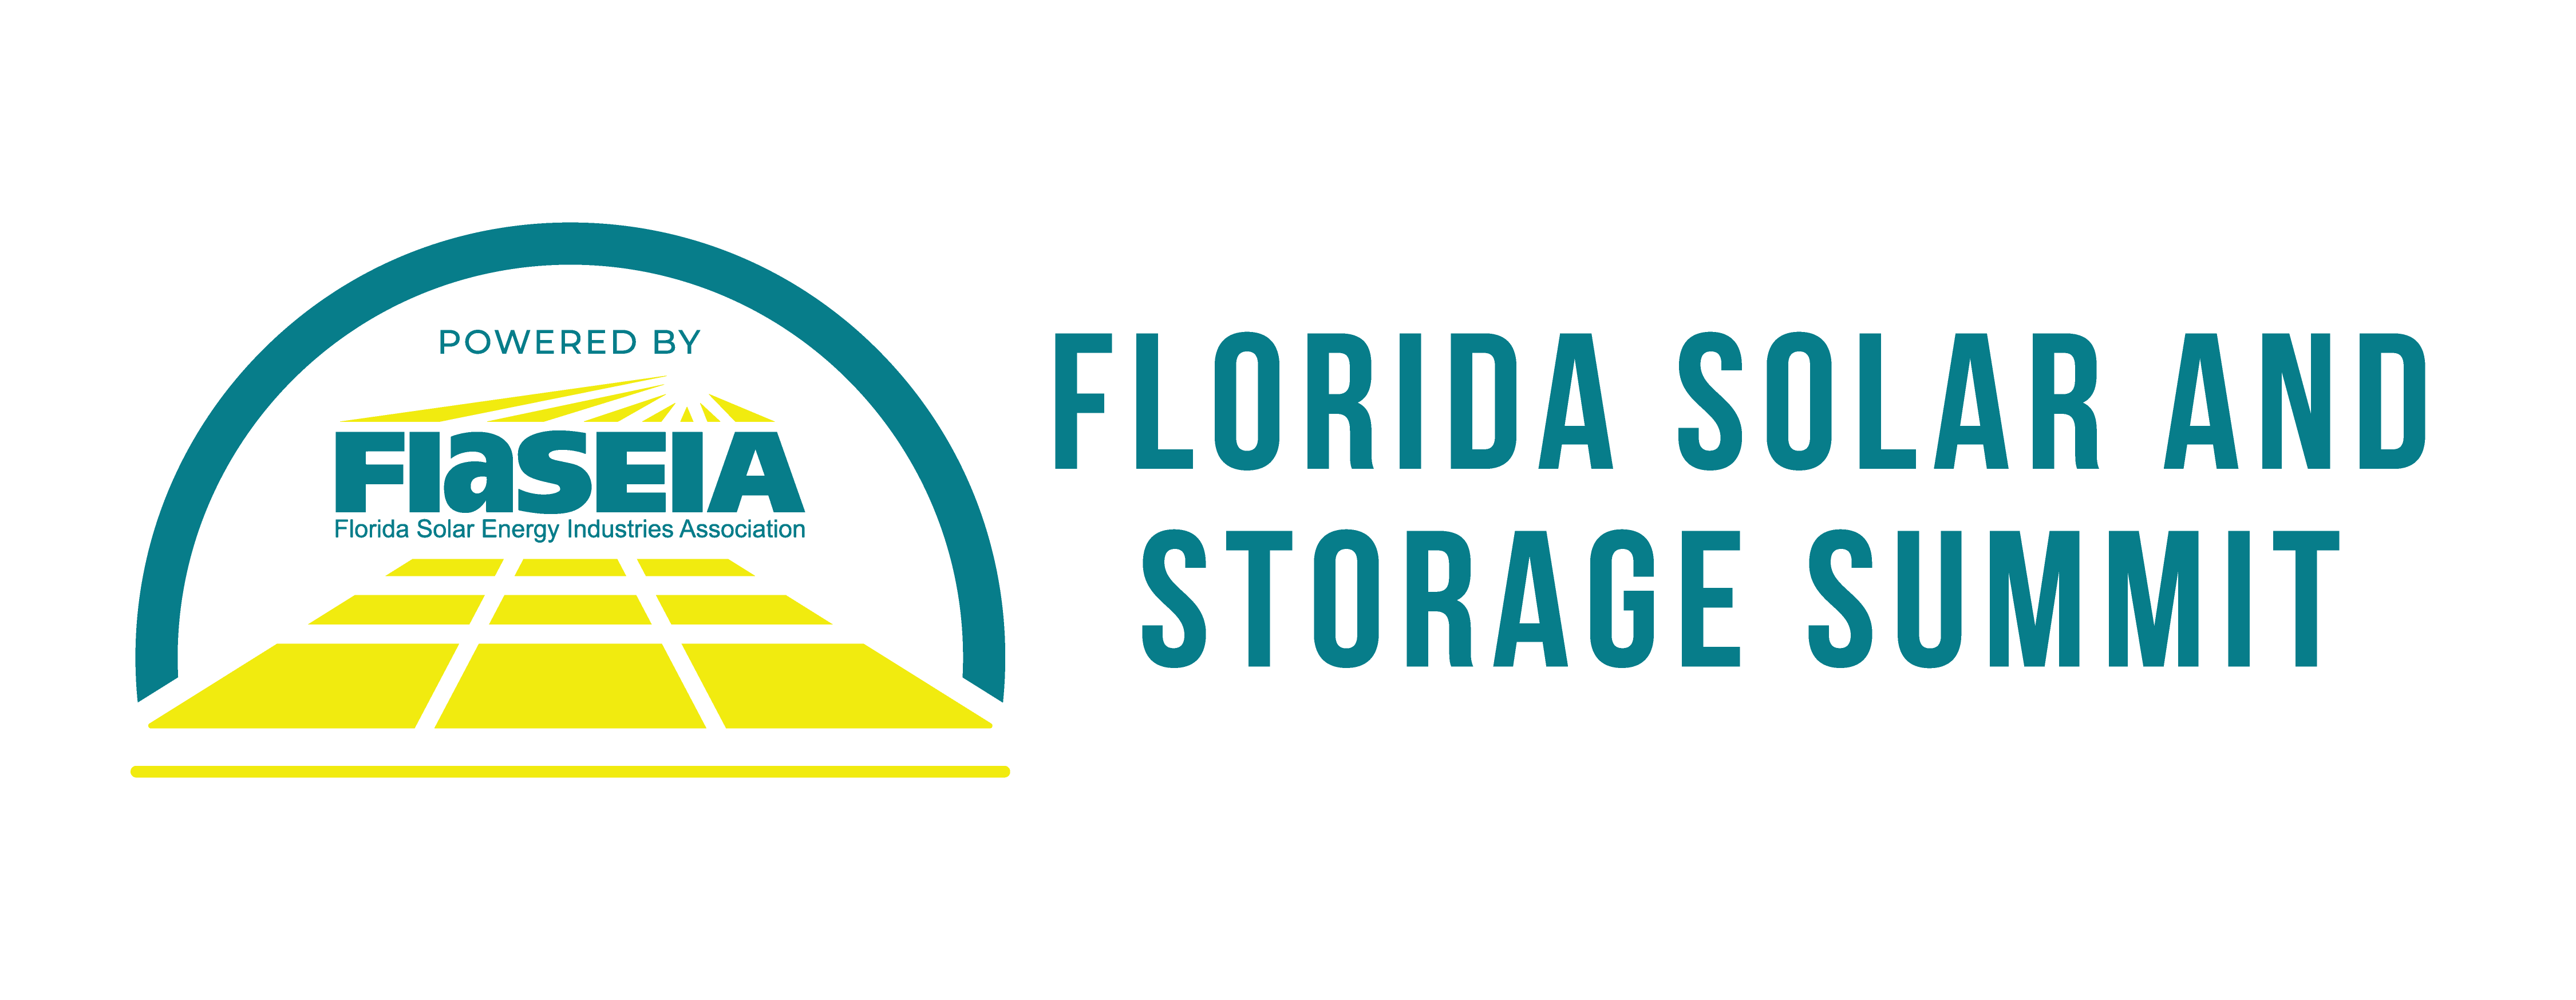 DS_Reuquest_ID_39840271 - Florida Solar And Storage Summit logo_without_final-02